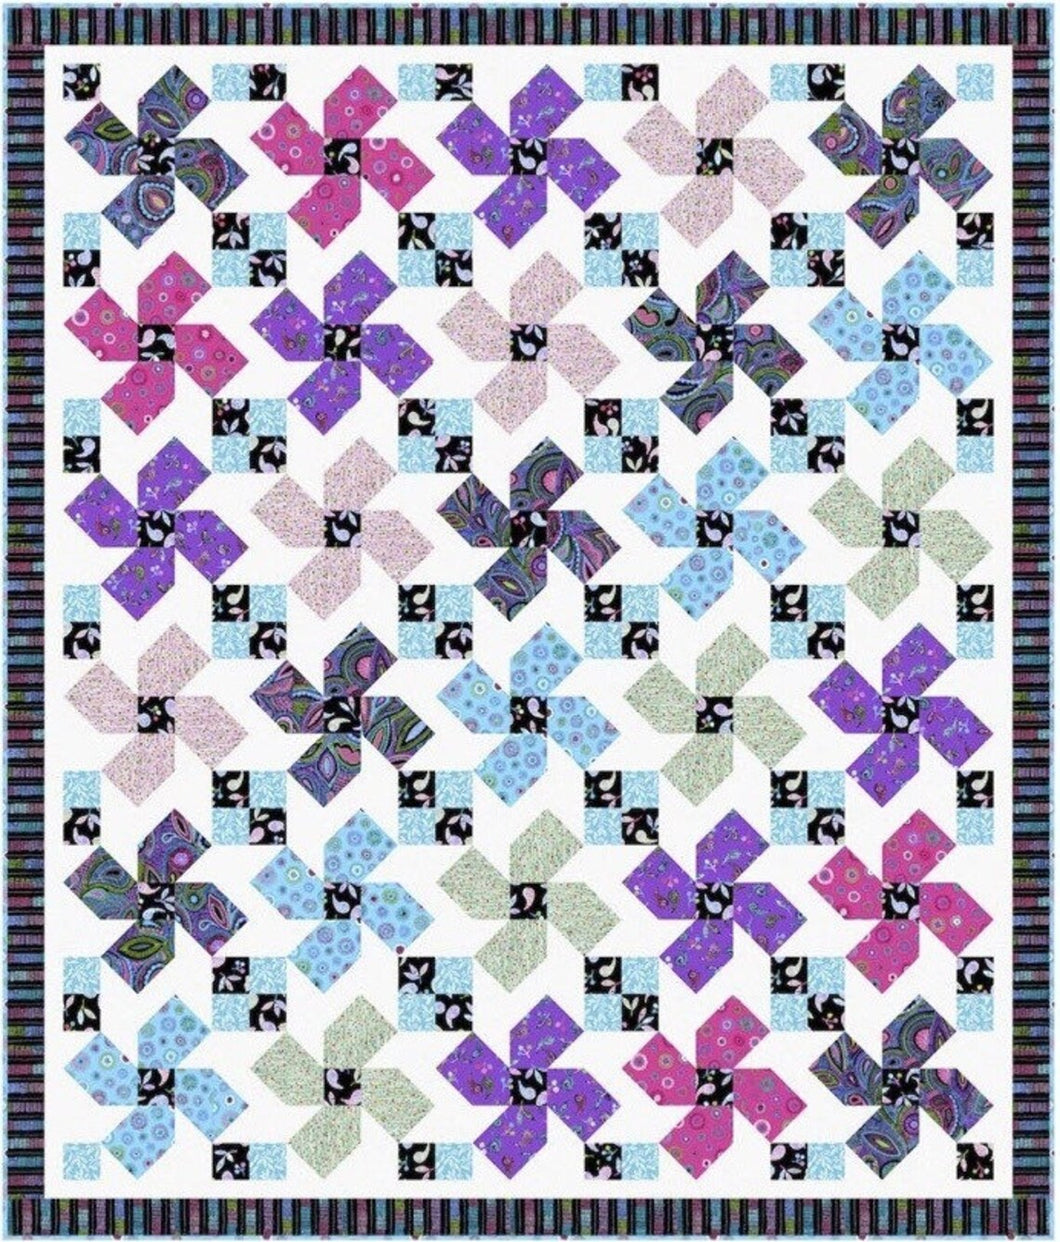 All in a Row Quilt Kit 4063A Featuring Petula Paisley